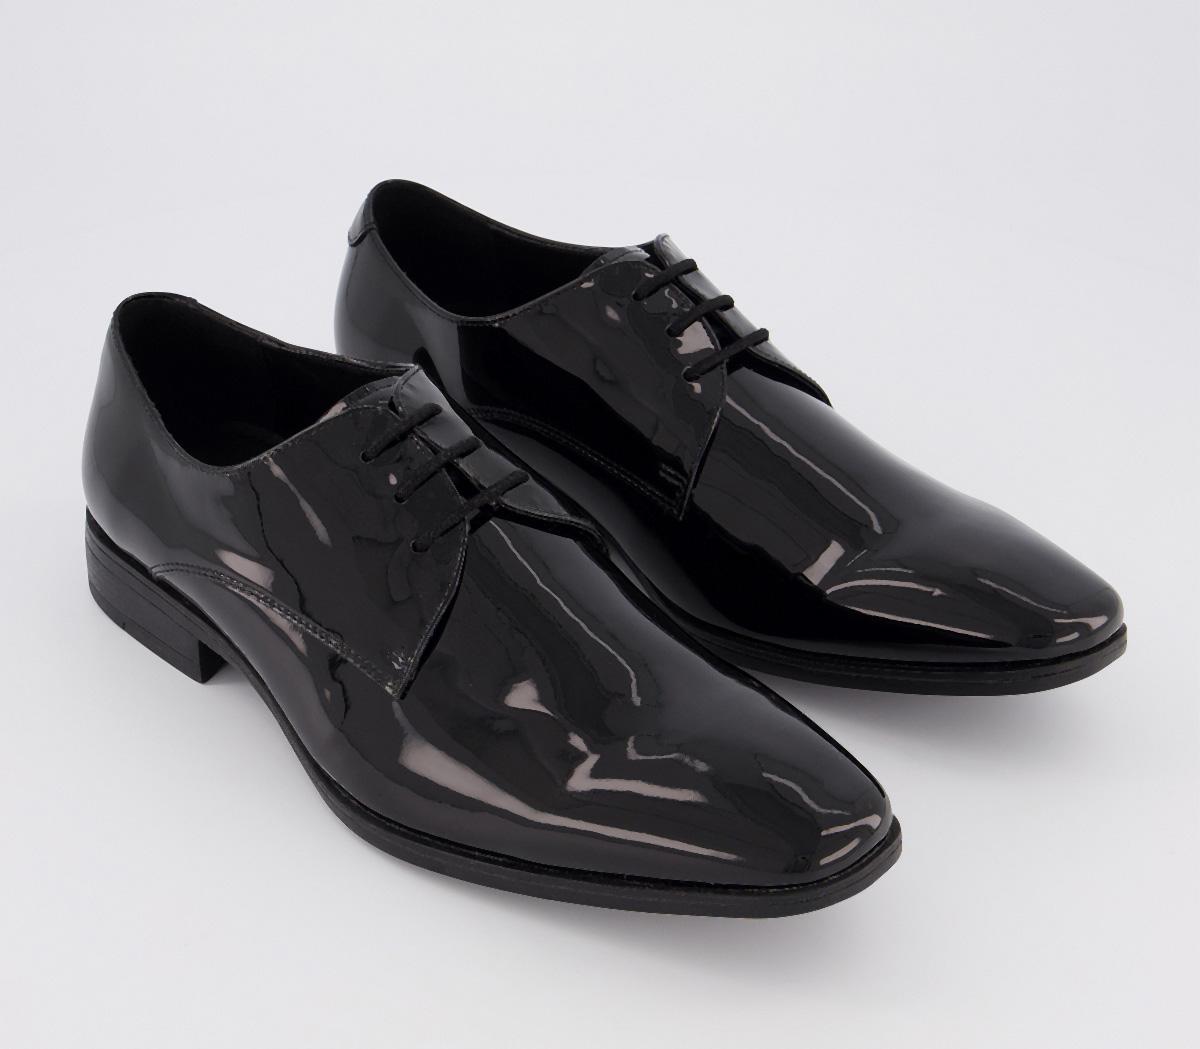 OFFICEMicro Derby ShoesBlack Patent